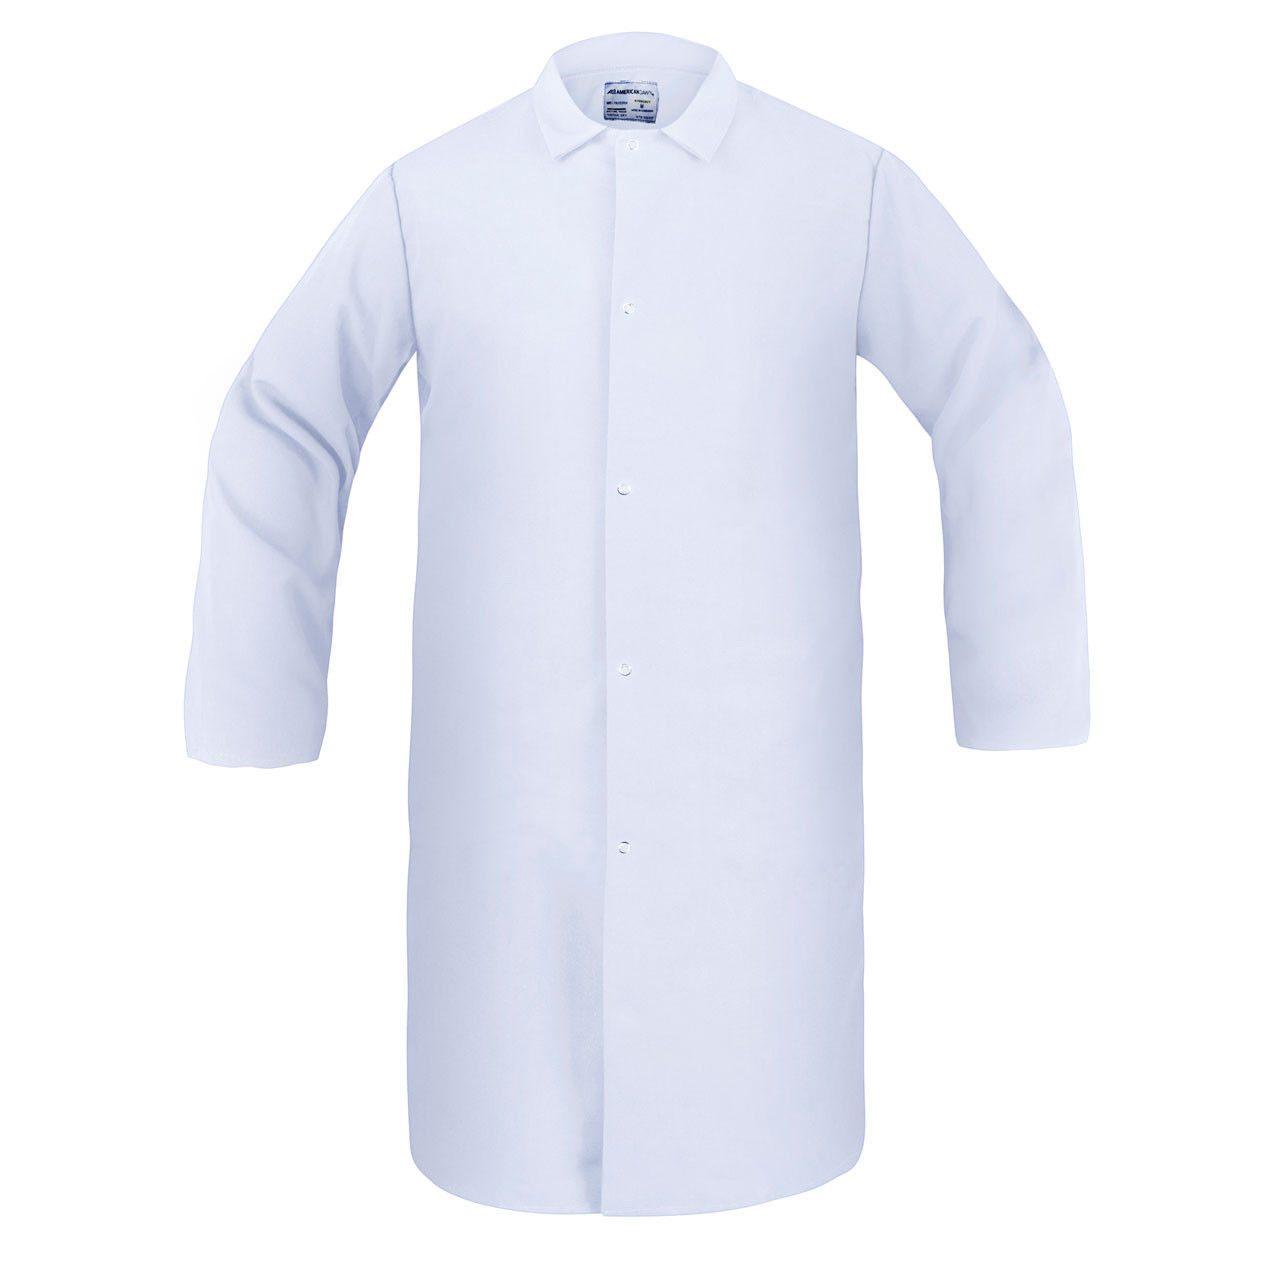 What material is the White Food Processing Frock made from?